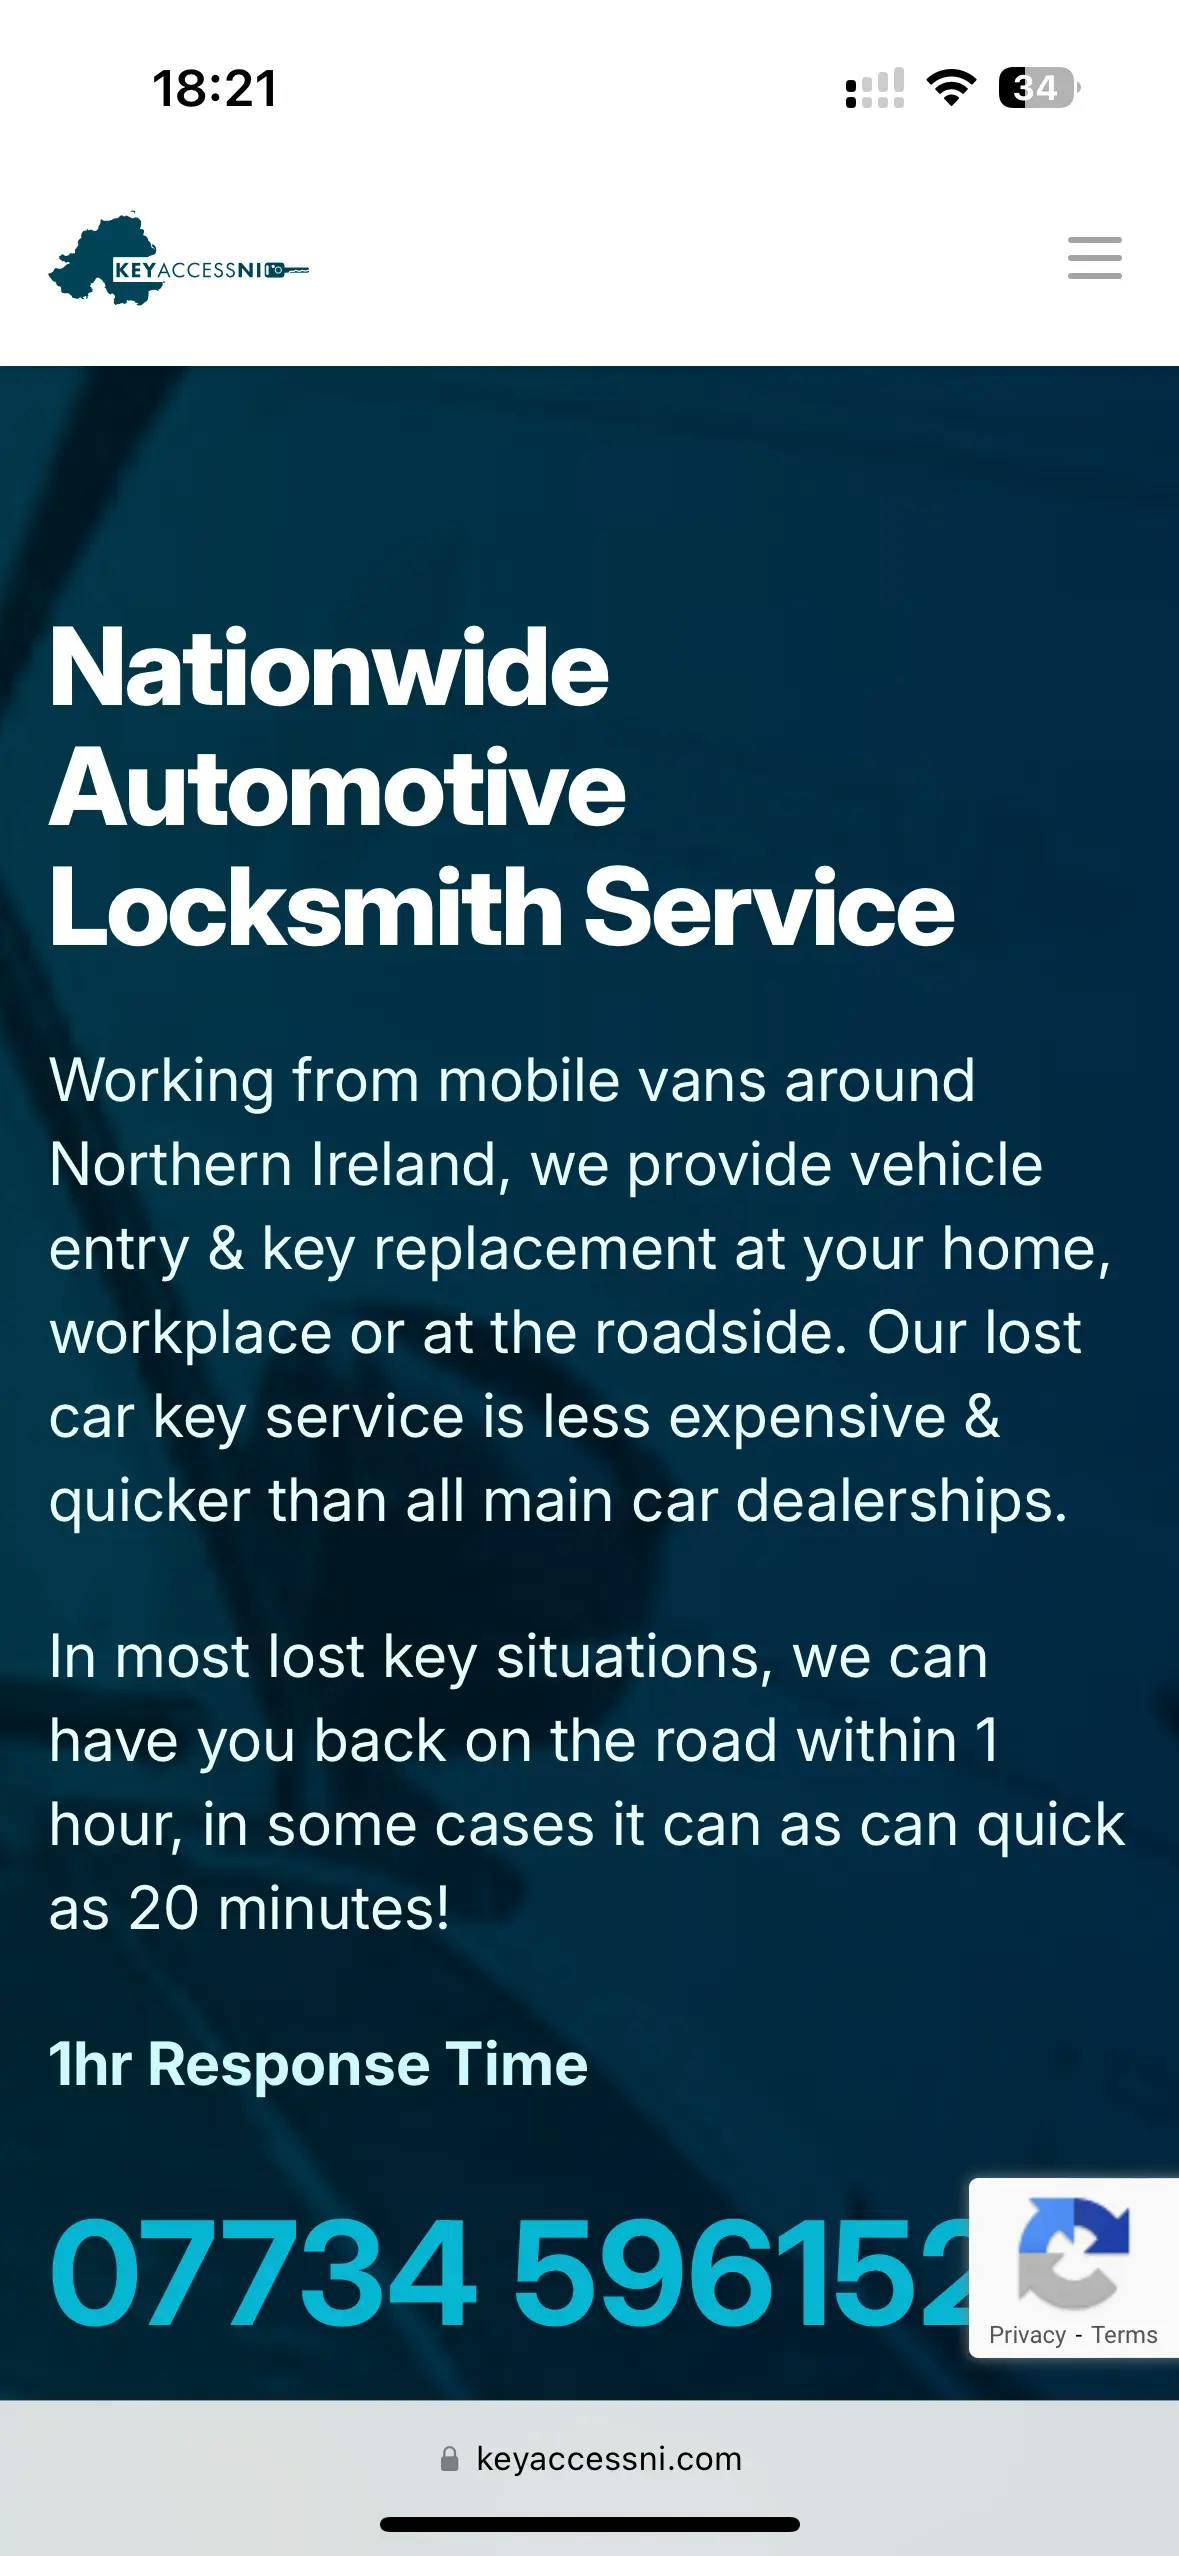 Key Access NI Home Page on Mobile